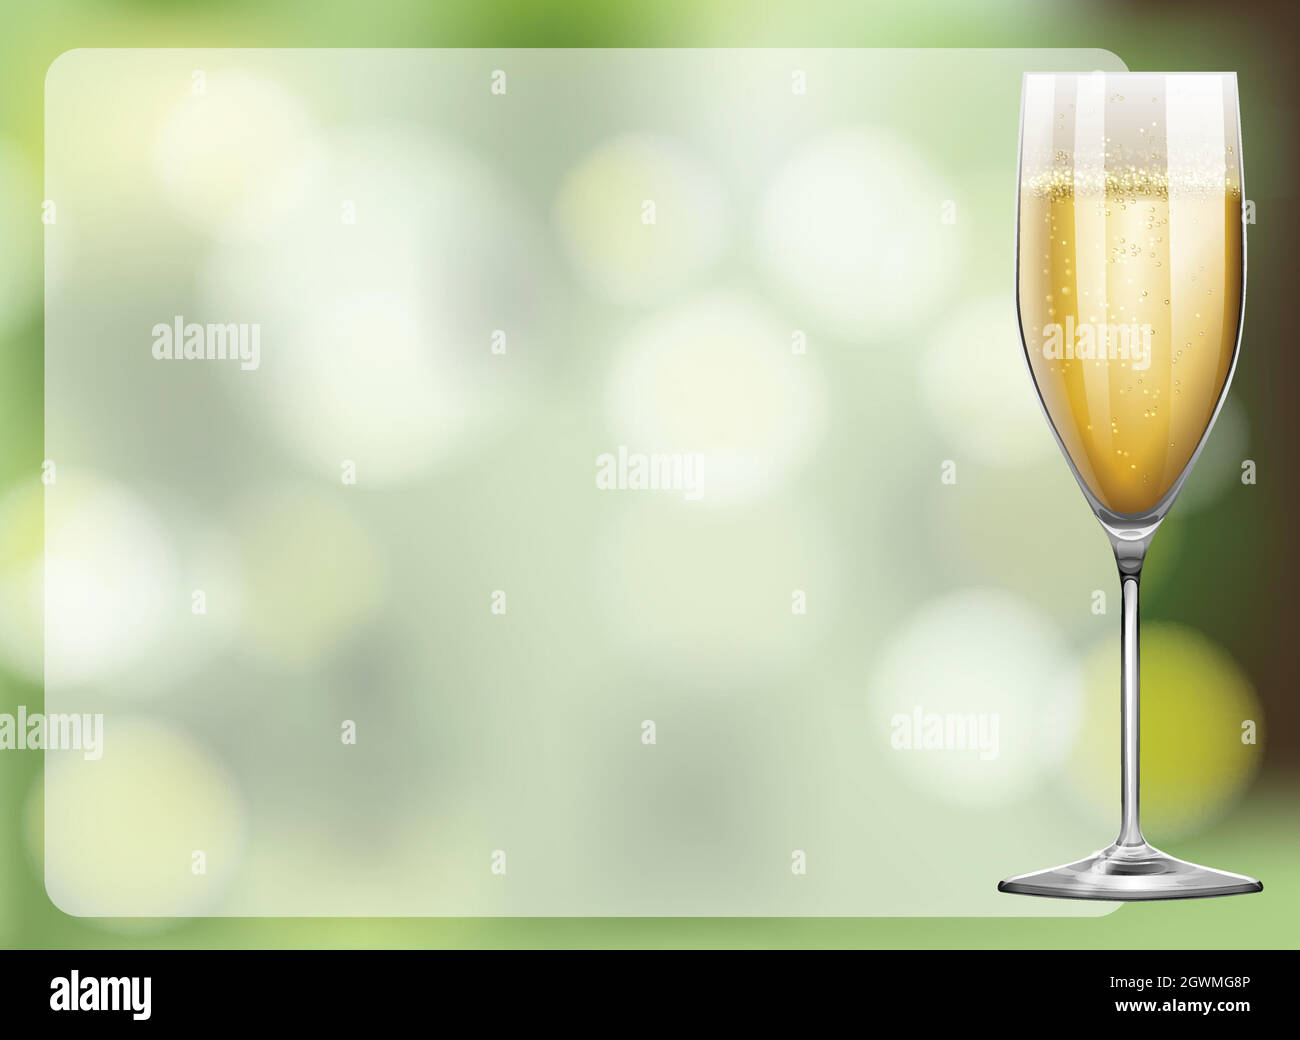 Frame design with champagne glass Stock Vector